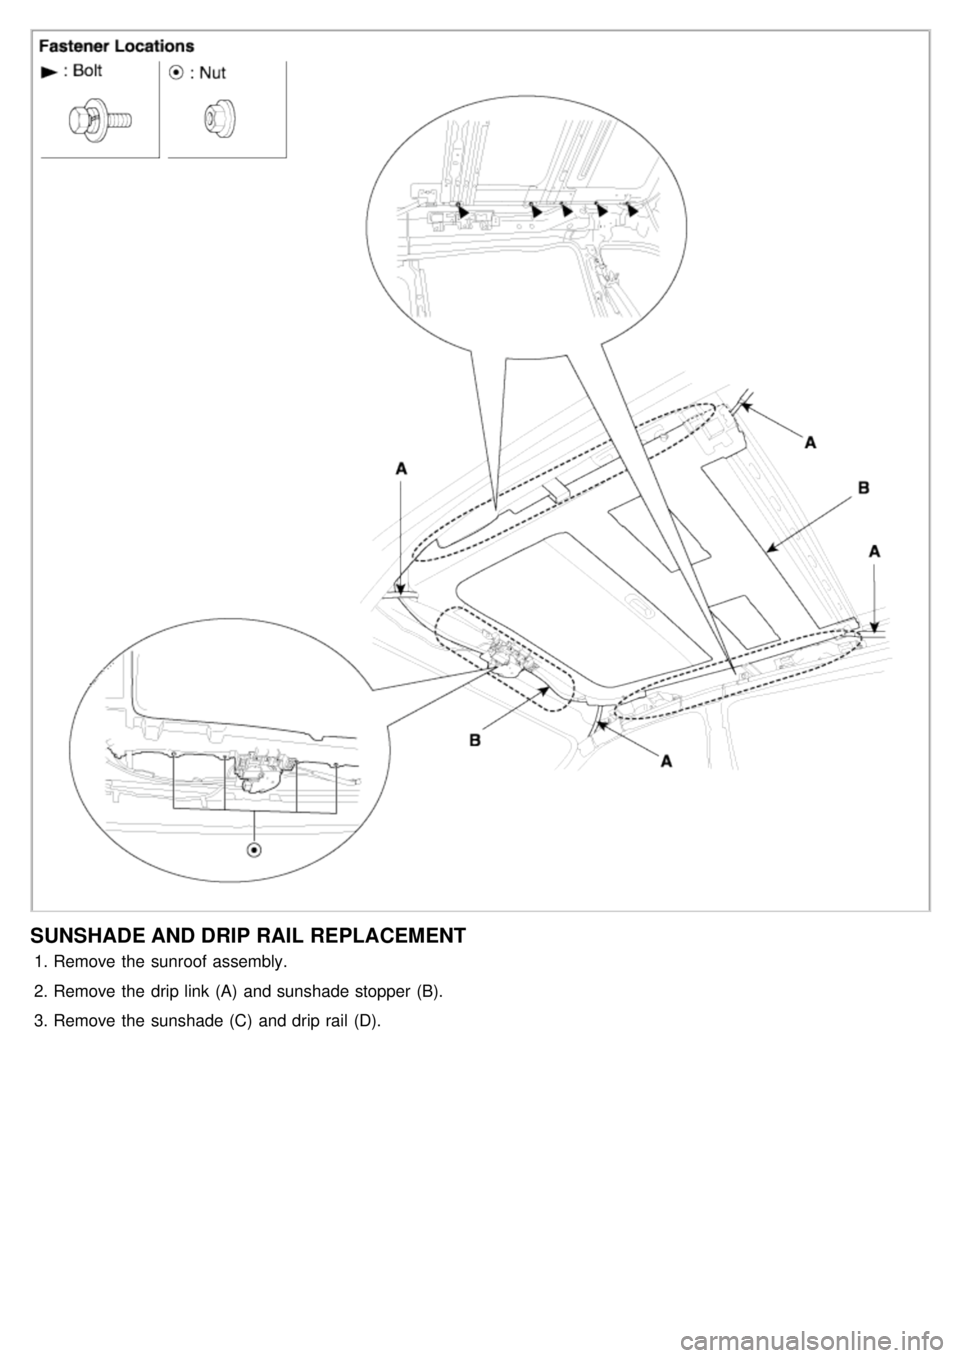 KIA CARNIVAL 2007  Workshop Manual SUNSHADE AND DRIP RAIL REPLACEMENT
1.Remove the  sunroof assembly.
2. Remove the  drip link (A)  and sunshade stopper (B).
3. Remove the  sunshade (C)  and drip rail  (D). 